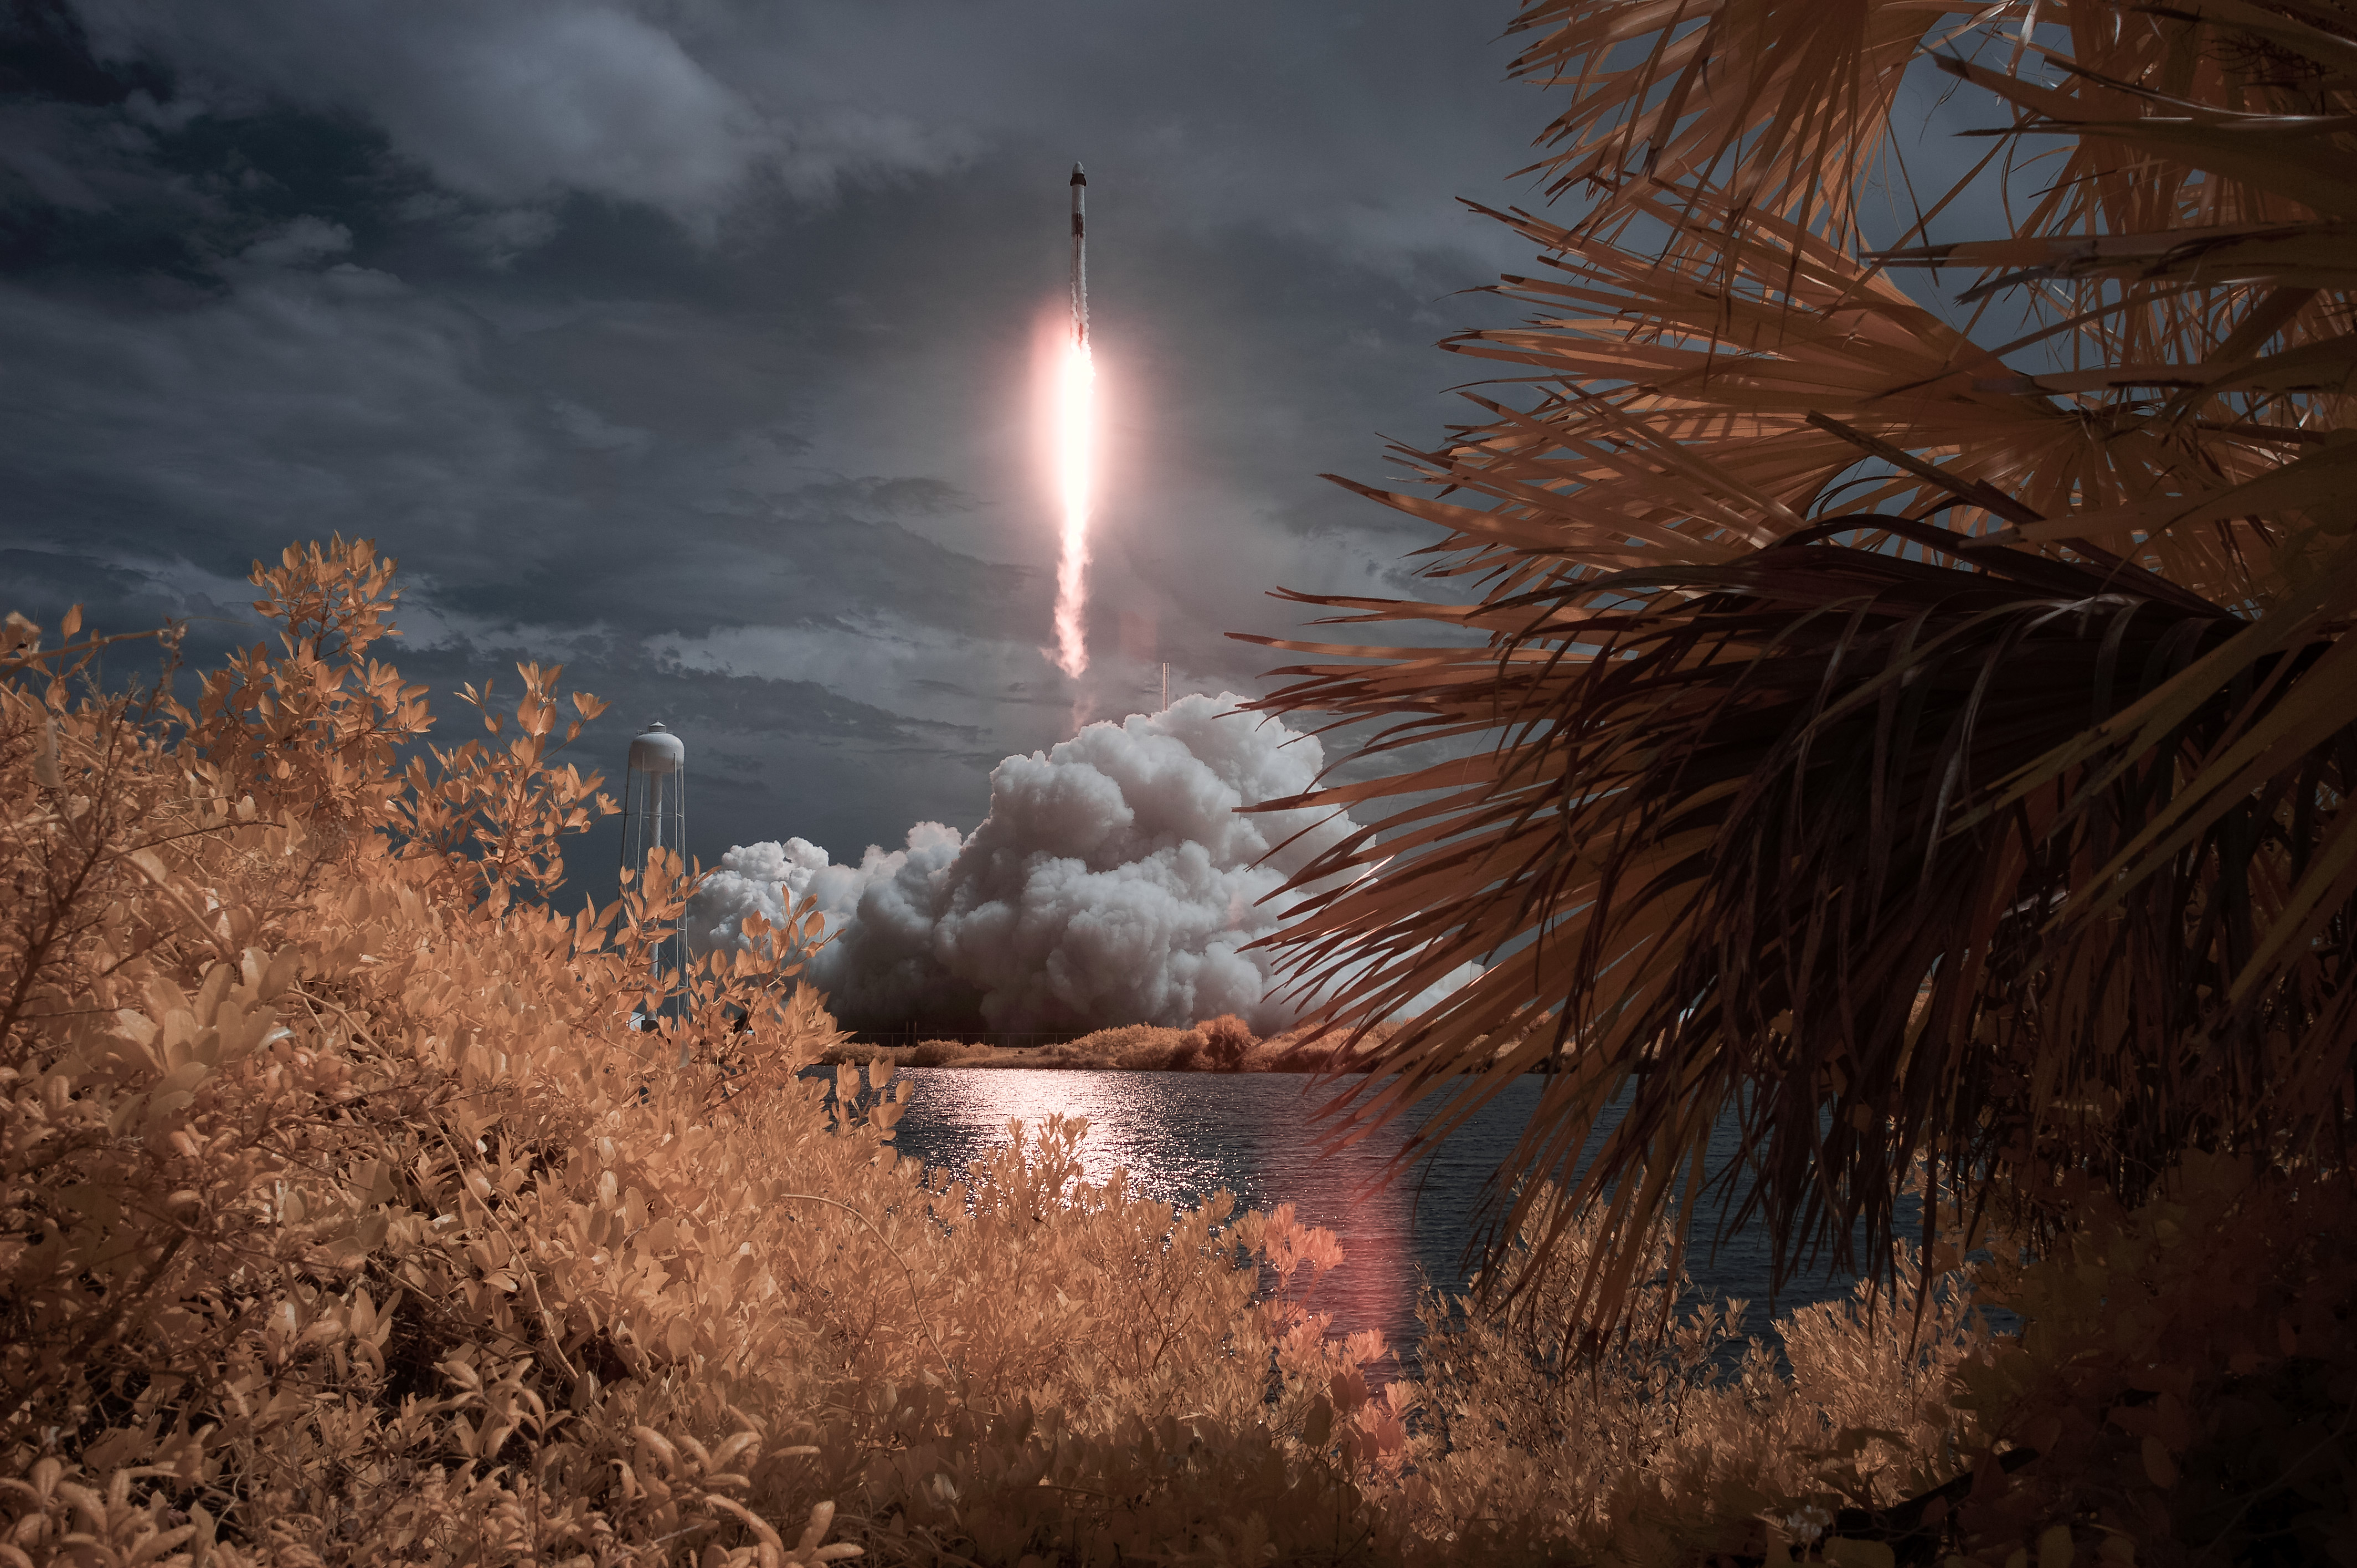 A SpaceX Falcon 9 rocket carrying the company's Crew Dragon spacecraft is seen in this false color infrared exposure as it is launched on NASA's SpaceX Demo-2 mission to the International Space Station with NASA astronauts Robert Behnken and Douglas Hurley onboard, Saturday, May 30, 2020, at NASA's Kennedy Space Center in Florida.